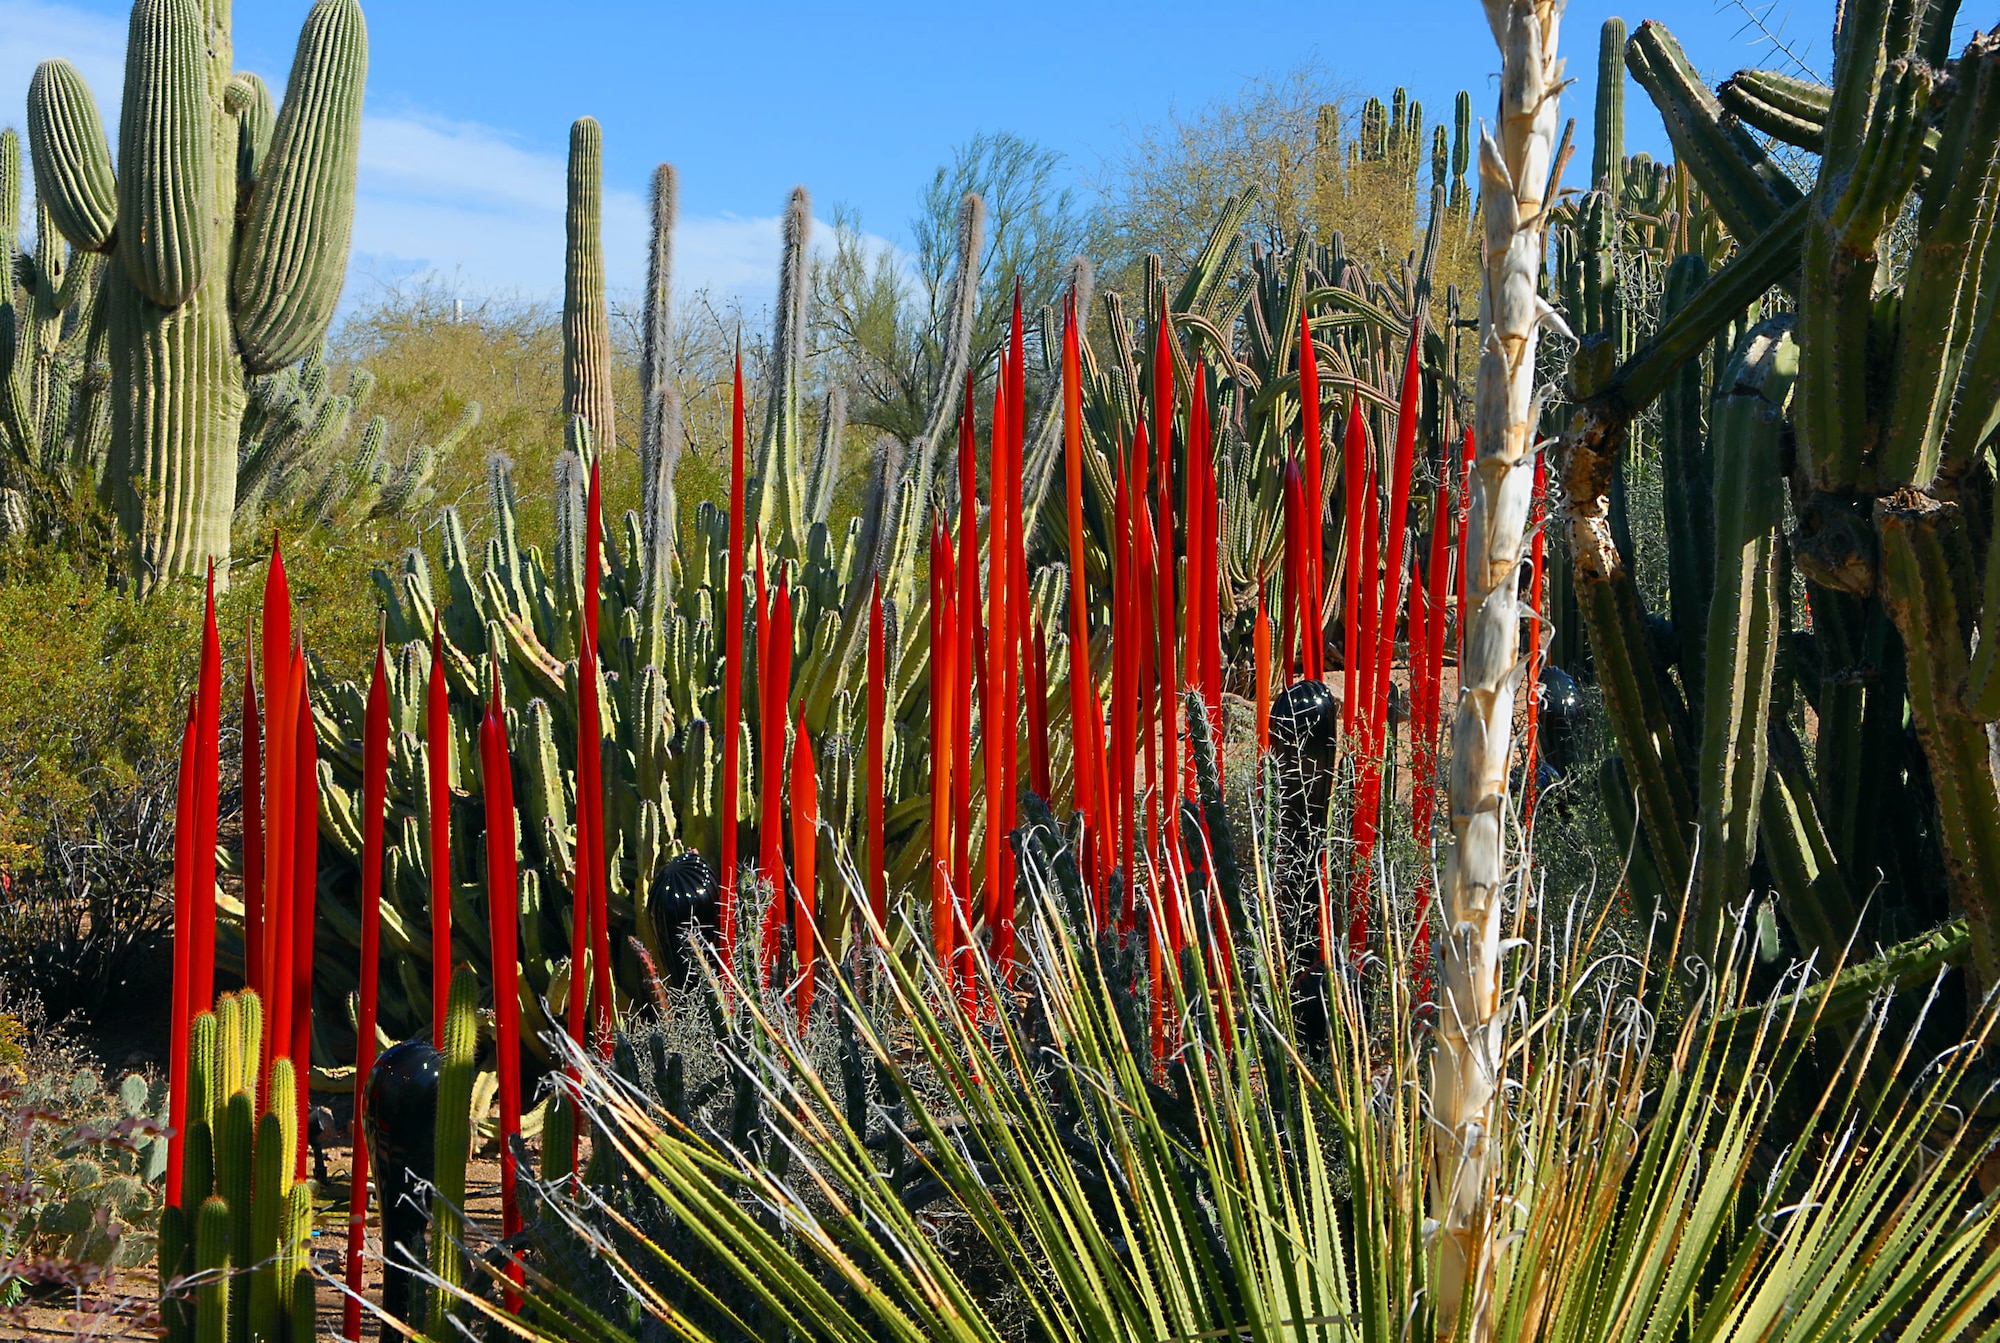 Sculptures made by artist, Dale Chihuly are on display at The Desert Botanical Gardens now through May 31. "Red Reeds" one of the many sculptures stands out among the green of the surrounding cactus. Admission to the garden is $15 and reservations are available.